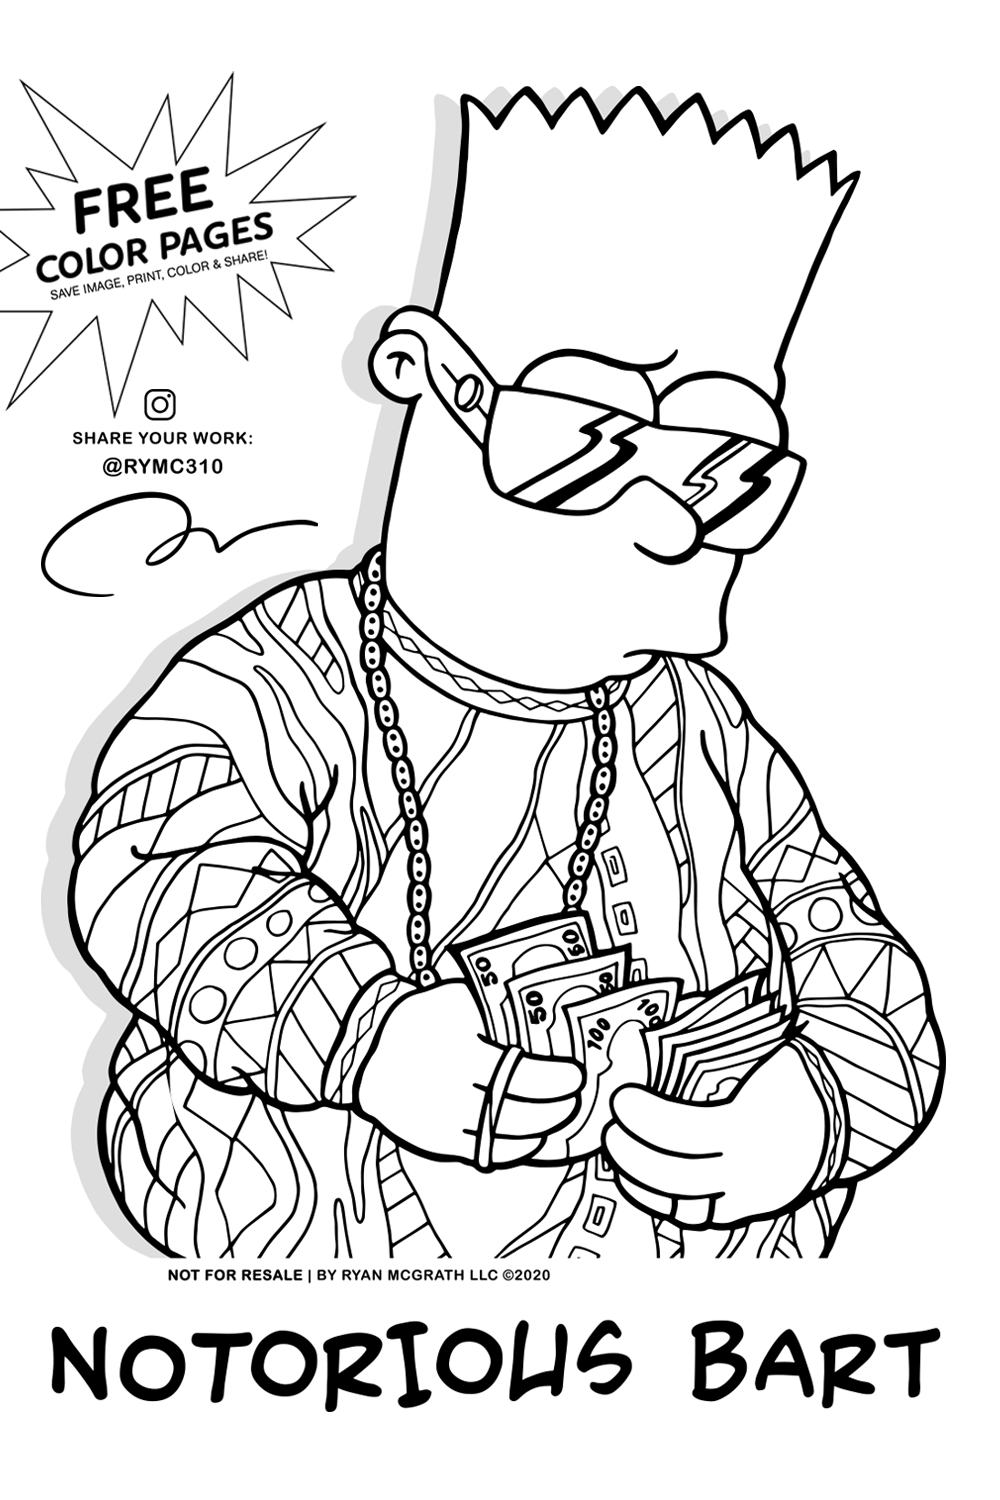 Notorious bart byrm color page coloring pages coloring book pages coloring books